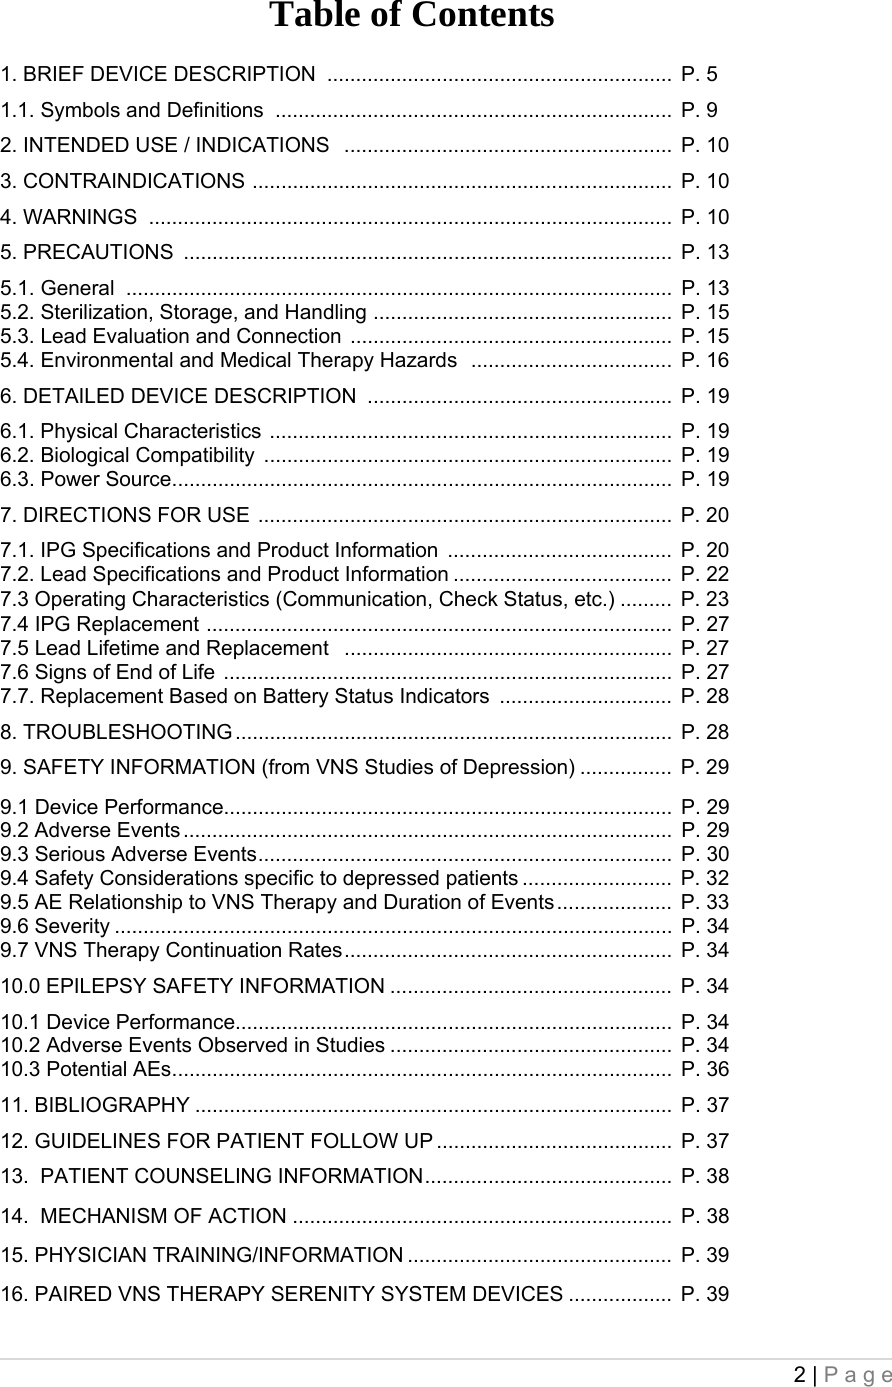 2 | Page  Table of Contents 1. BRIEF DEVICE DESCRIPTION  ............................................................  P. 5 1.1. Symbols and Definitions  .....................................................................  P. 9 2. INTENDED USE / INDICATIONS   .........................................................  P. 10 3. CONTRAINDICATIONS  .........................................................................  P. 10 4. WARNINGS  ...........................................................................................  P. 10 5. PRECAUTIONS  .....................................................................................  P. 13 5.1. General  ...............................................................................................  P. 13 5.2. Sterilization, Storage, and Handling  ....................................................  P. 15 5.3. Lead Evaluation and Connection  ........................................................  P. 15 5.4. Environmental and Medical Therapy Hazards   ...................................  P. 16 6. DETAILED DEVICE DESCRIPTION  .....................................................  P. 19 6.1. Physical Characteristics  ......................................................................  P. 19 6.2. Biological Compatibility  .......................................................................  P. 19 6.3. Power Source .......................................................................................  P. 19 7. DIRECTIONS FOR USE  ........................................................................  P. 20 7.1. IPG Specifications and Product Information  .......................................  P. 20 7.2. Lead Specifications and Product Information ......................................  P. 22 7.3 Operating Characteristics (Communication, Check Status, etc.) .........  P. 23 7.4 IPG Replacement  .................................................................................  P. 27 7.5 Lead Lifetime and Replacement   .........................................................  P. 27 7.6 Signs of End of Life  ..............................................................................  P. 27 7.7. Replacement Based on Battery Status Indicators  ..............................  P. 28 8. TROUBLESHOOTING ............................................................................  P. 28 9. SAFETY INFORMATION (from VNS Studies of Depression) ................  P. 29 9.1 Device Performance..............................................................................  P. 29 9.2 Adverse Events .....................................................................................  P. 29 9.3 Serious Adverse Events ........................................................................  P. 30 9.4 Safety Considerations specific to depressed patients ..........................  P. 32 9.5 AE Relationship to VNS Therapy and Duration of Events ....................  P. 33 9.6 Severity .................................................................................................  P. 34 9.7 VNS Therapy Continuation Rates .........................................................  P. 34 10.0 EPILEPSY SAFETY INFORMATION .................................................  P. 34 10.1 Device Performance............................................................................  P. 34 10.2 Adverse Events Observed in Studies .................................................  P. 34 10.3 Potential AEs .......................................................................................  P. 36 11. BIBLIOGRAPHY ...................................................................................  P. 37 12. GUIDELINES FOR PATIENT FOLLOW UP .........................................  P. 37 13.  PATIENT COUNSELING INFORMATION ...........................................  P. 38 14.  MECHANISM OF ACTION ..................................................................  P. 38 15. PHYSICIAN TRAINING/INFORMATION ..............................................  P. 39 16. PAIRED VNS THERAPY SERENITY SYSTEM DEVICES ..................  P. 39 